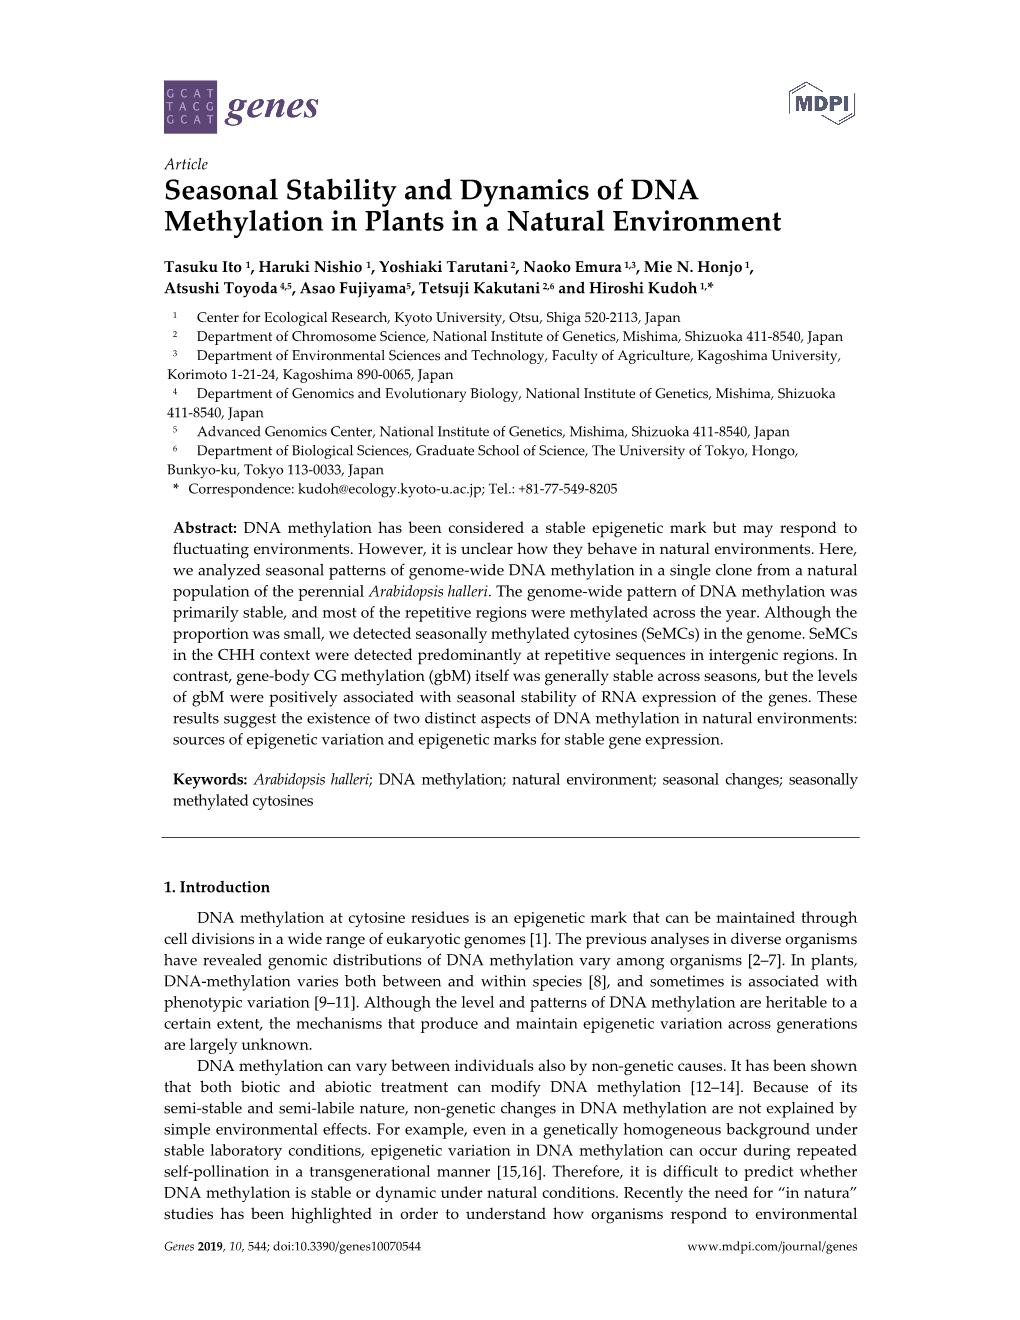 Seasonal Stability and Dynamics of DNA Methylation in Plants in a Natural Environment